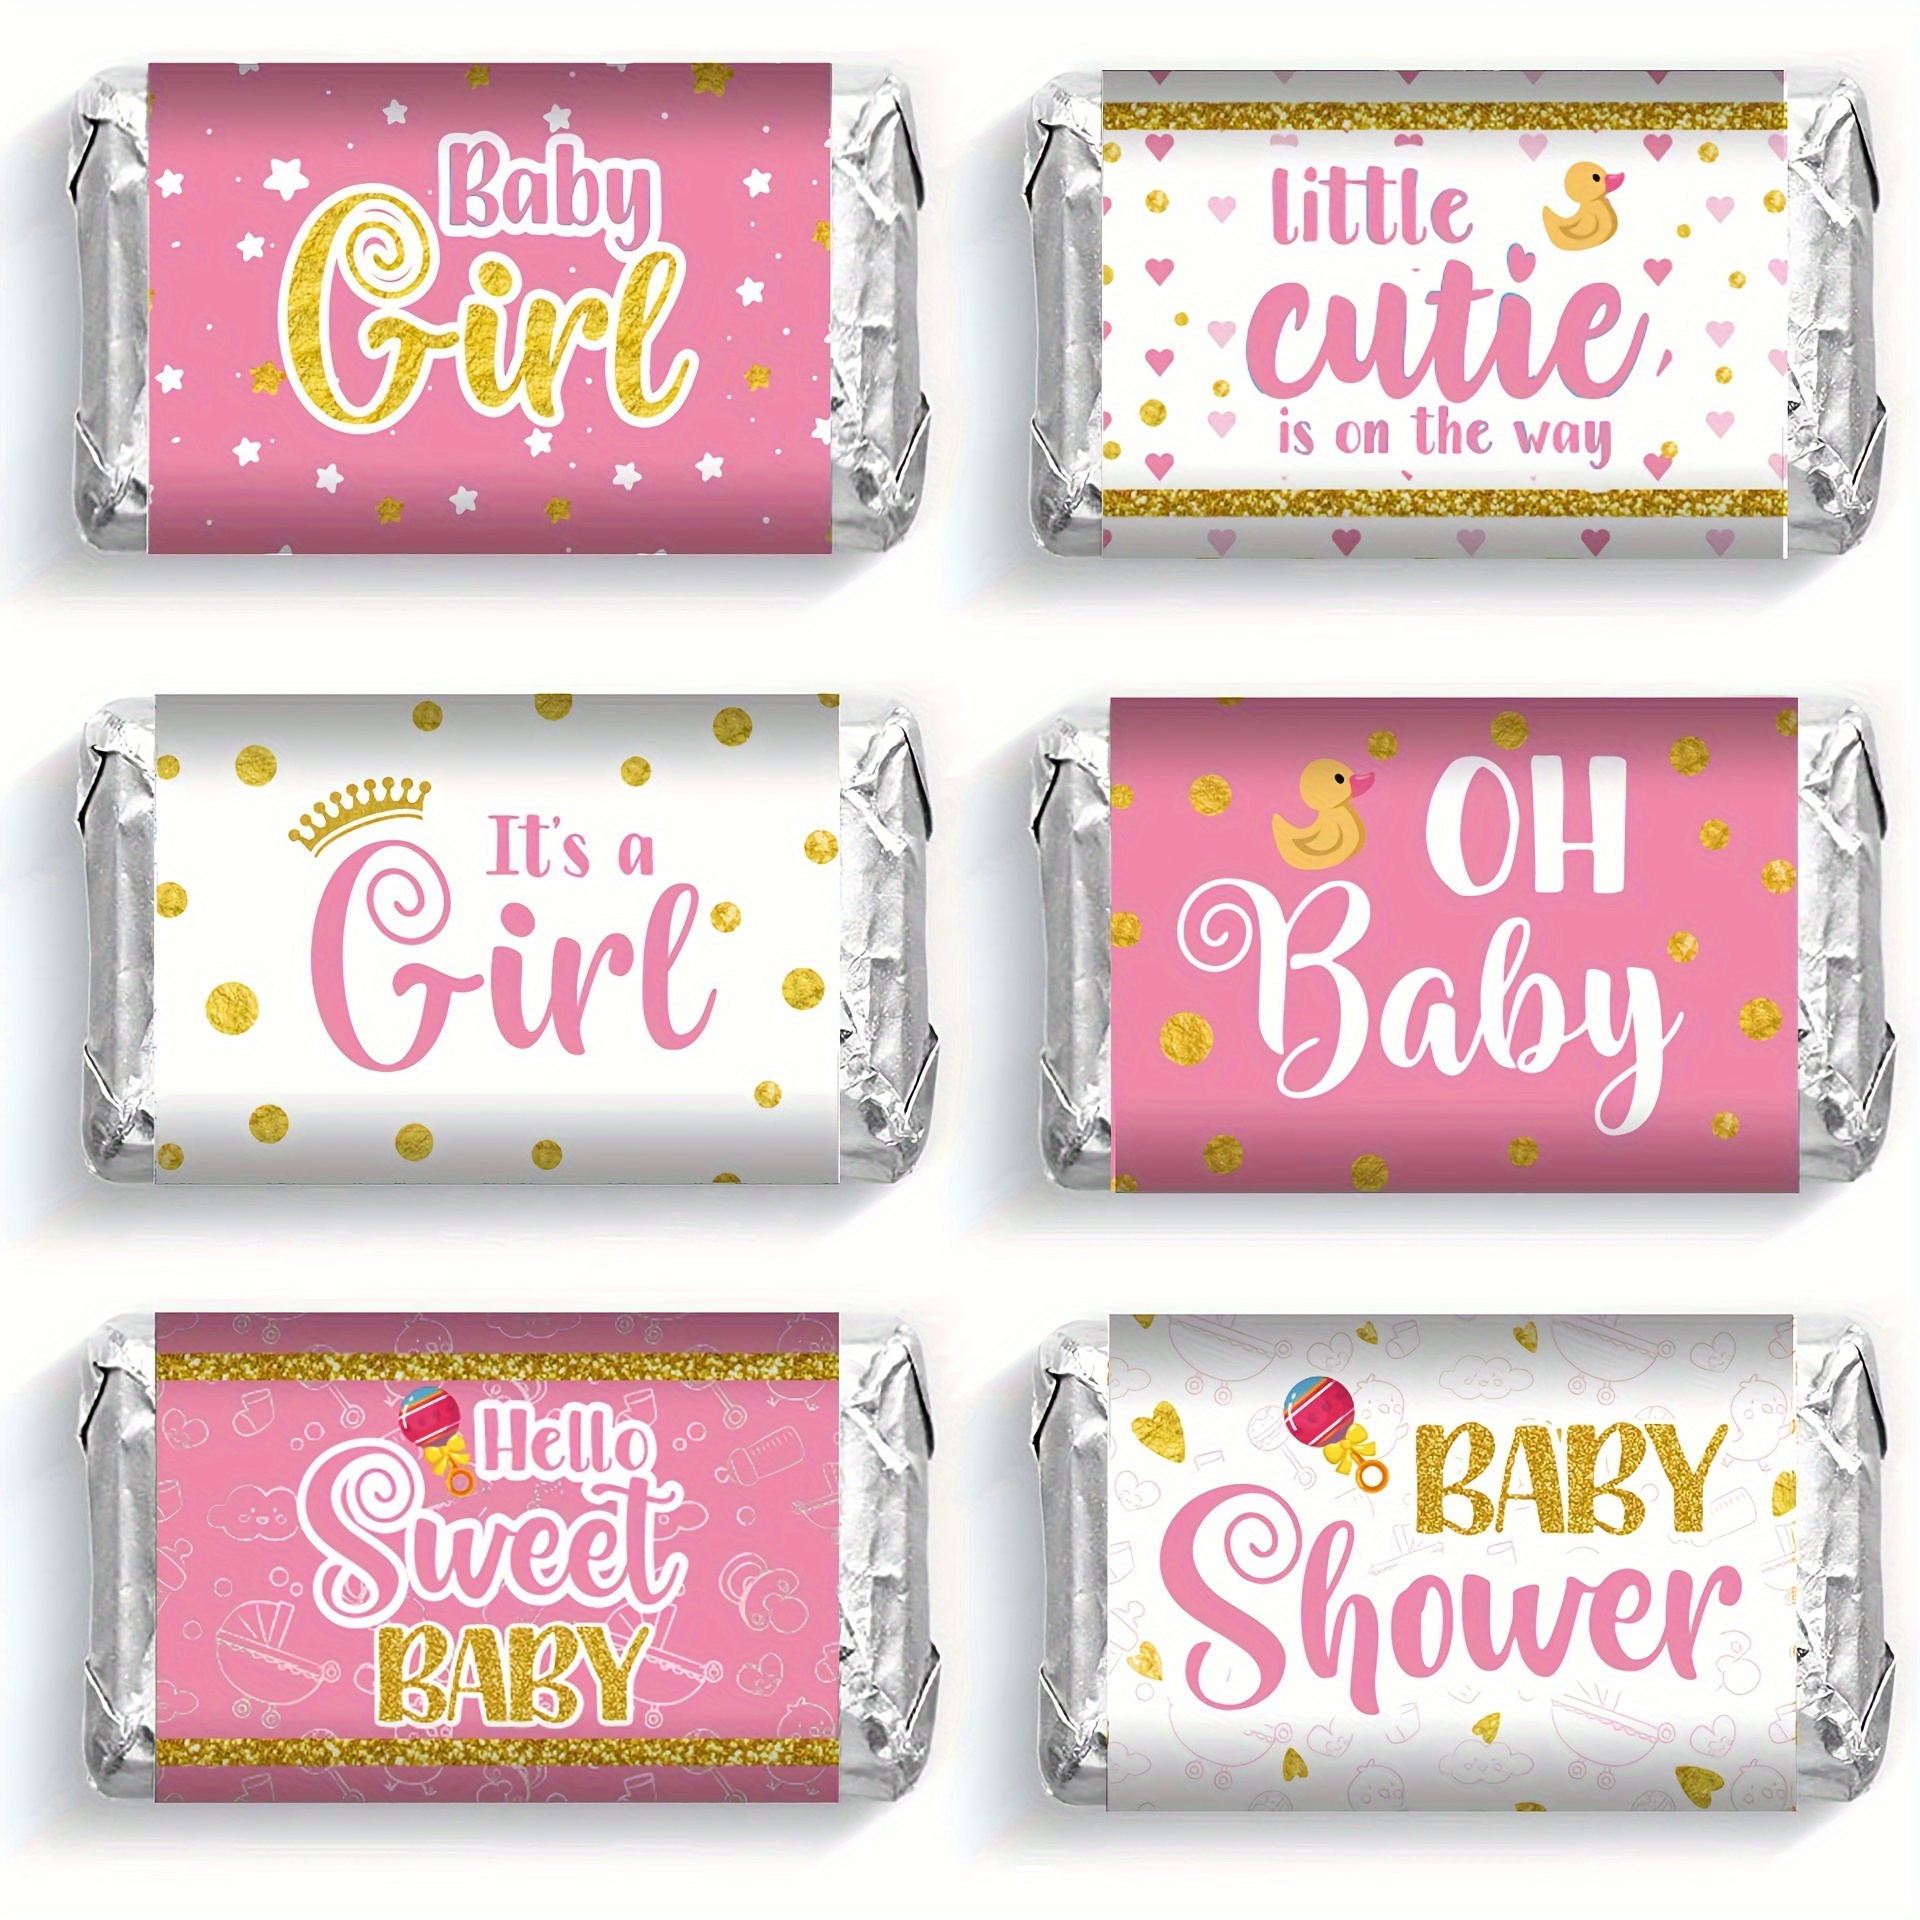 

36pcs, Baby Shower Candy Wrappers, Shower Mini Candy Bar Miniatures Wrappers Chocolate Bar Label Stickers For Baby Shower Decor, Gender Reveal Party Chocolate Stickers(blue, Pink, Blue&pink)